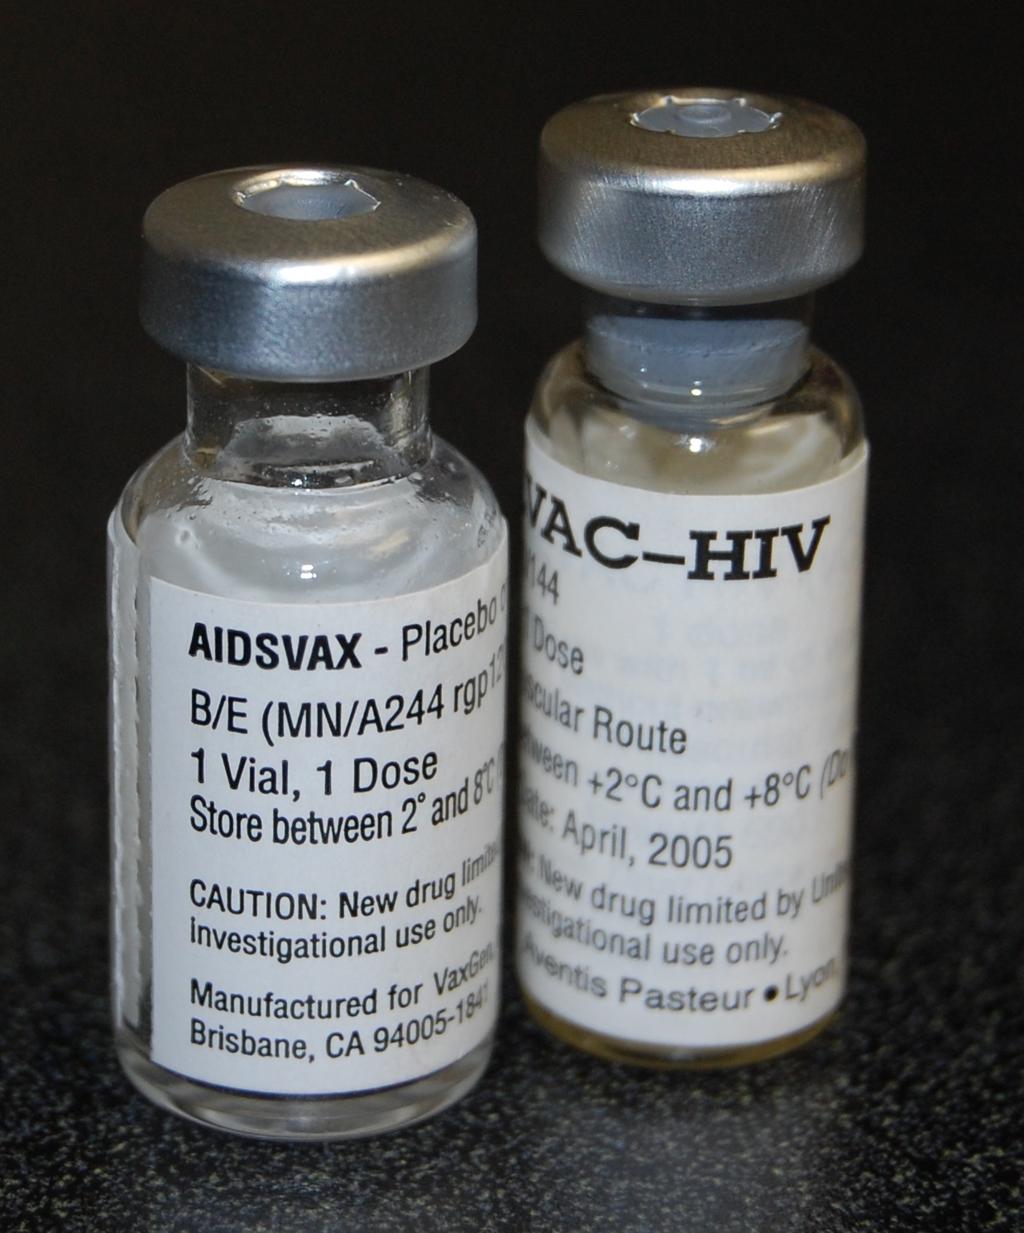 RV144 Prime-boost: ALVAC-HIV (gag, pol, env in canarypox vector) and AIDSVAX B/E (recombinant gp120 protein) 16,000 adult volunteers in Thailand 6